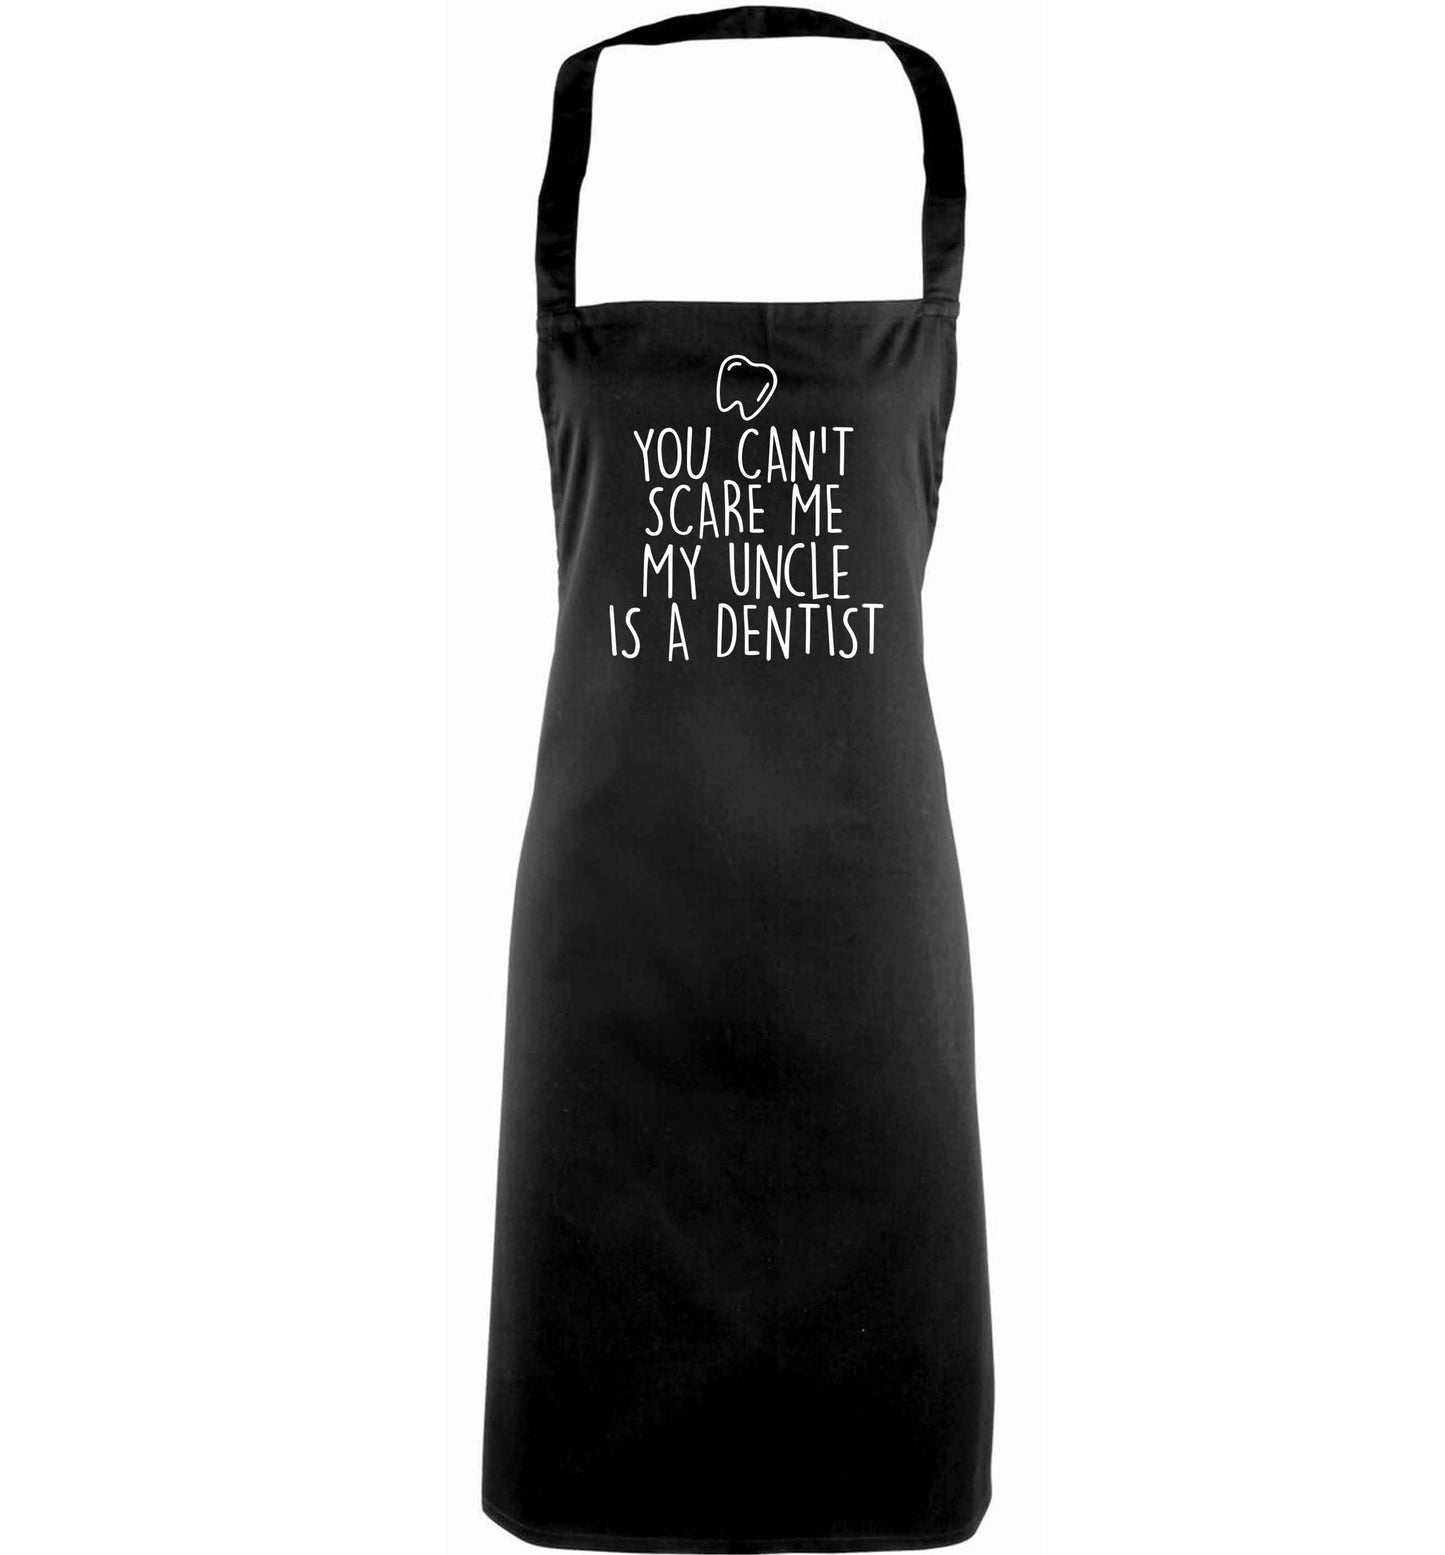 You can't scare me my uncle is a dentist adults black apron